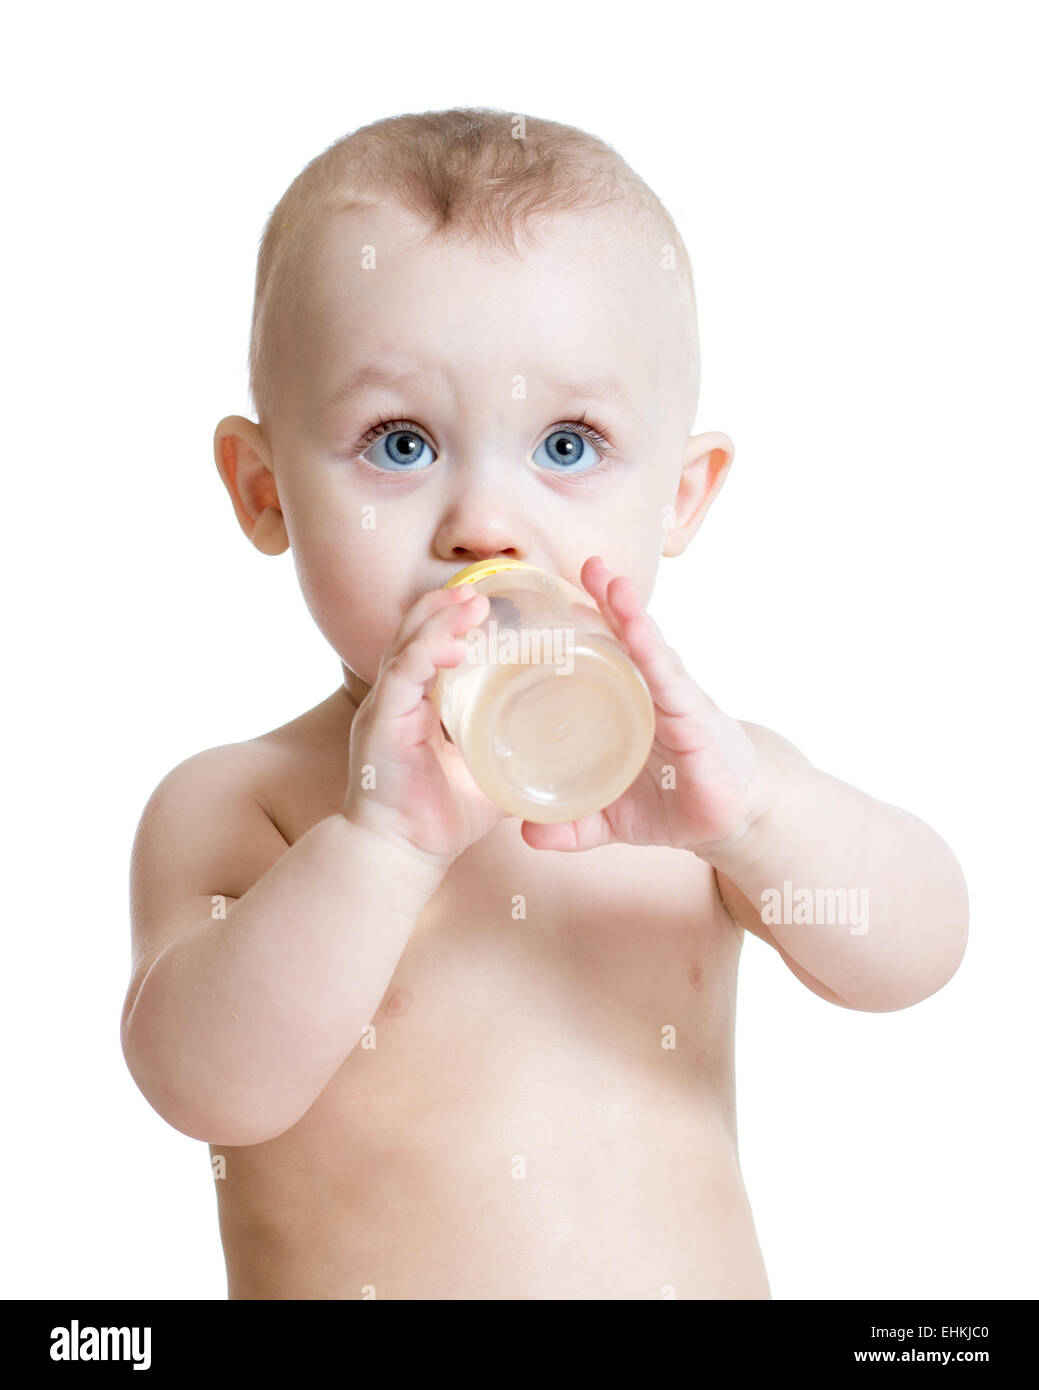 adorable child drinking from bottle Stock Photo